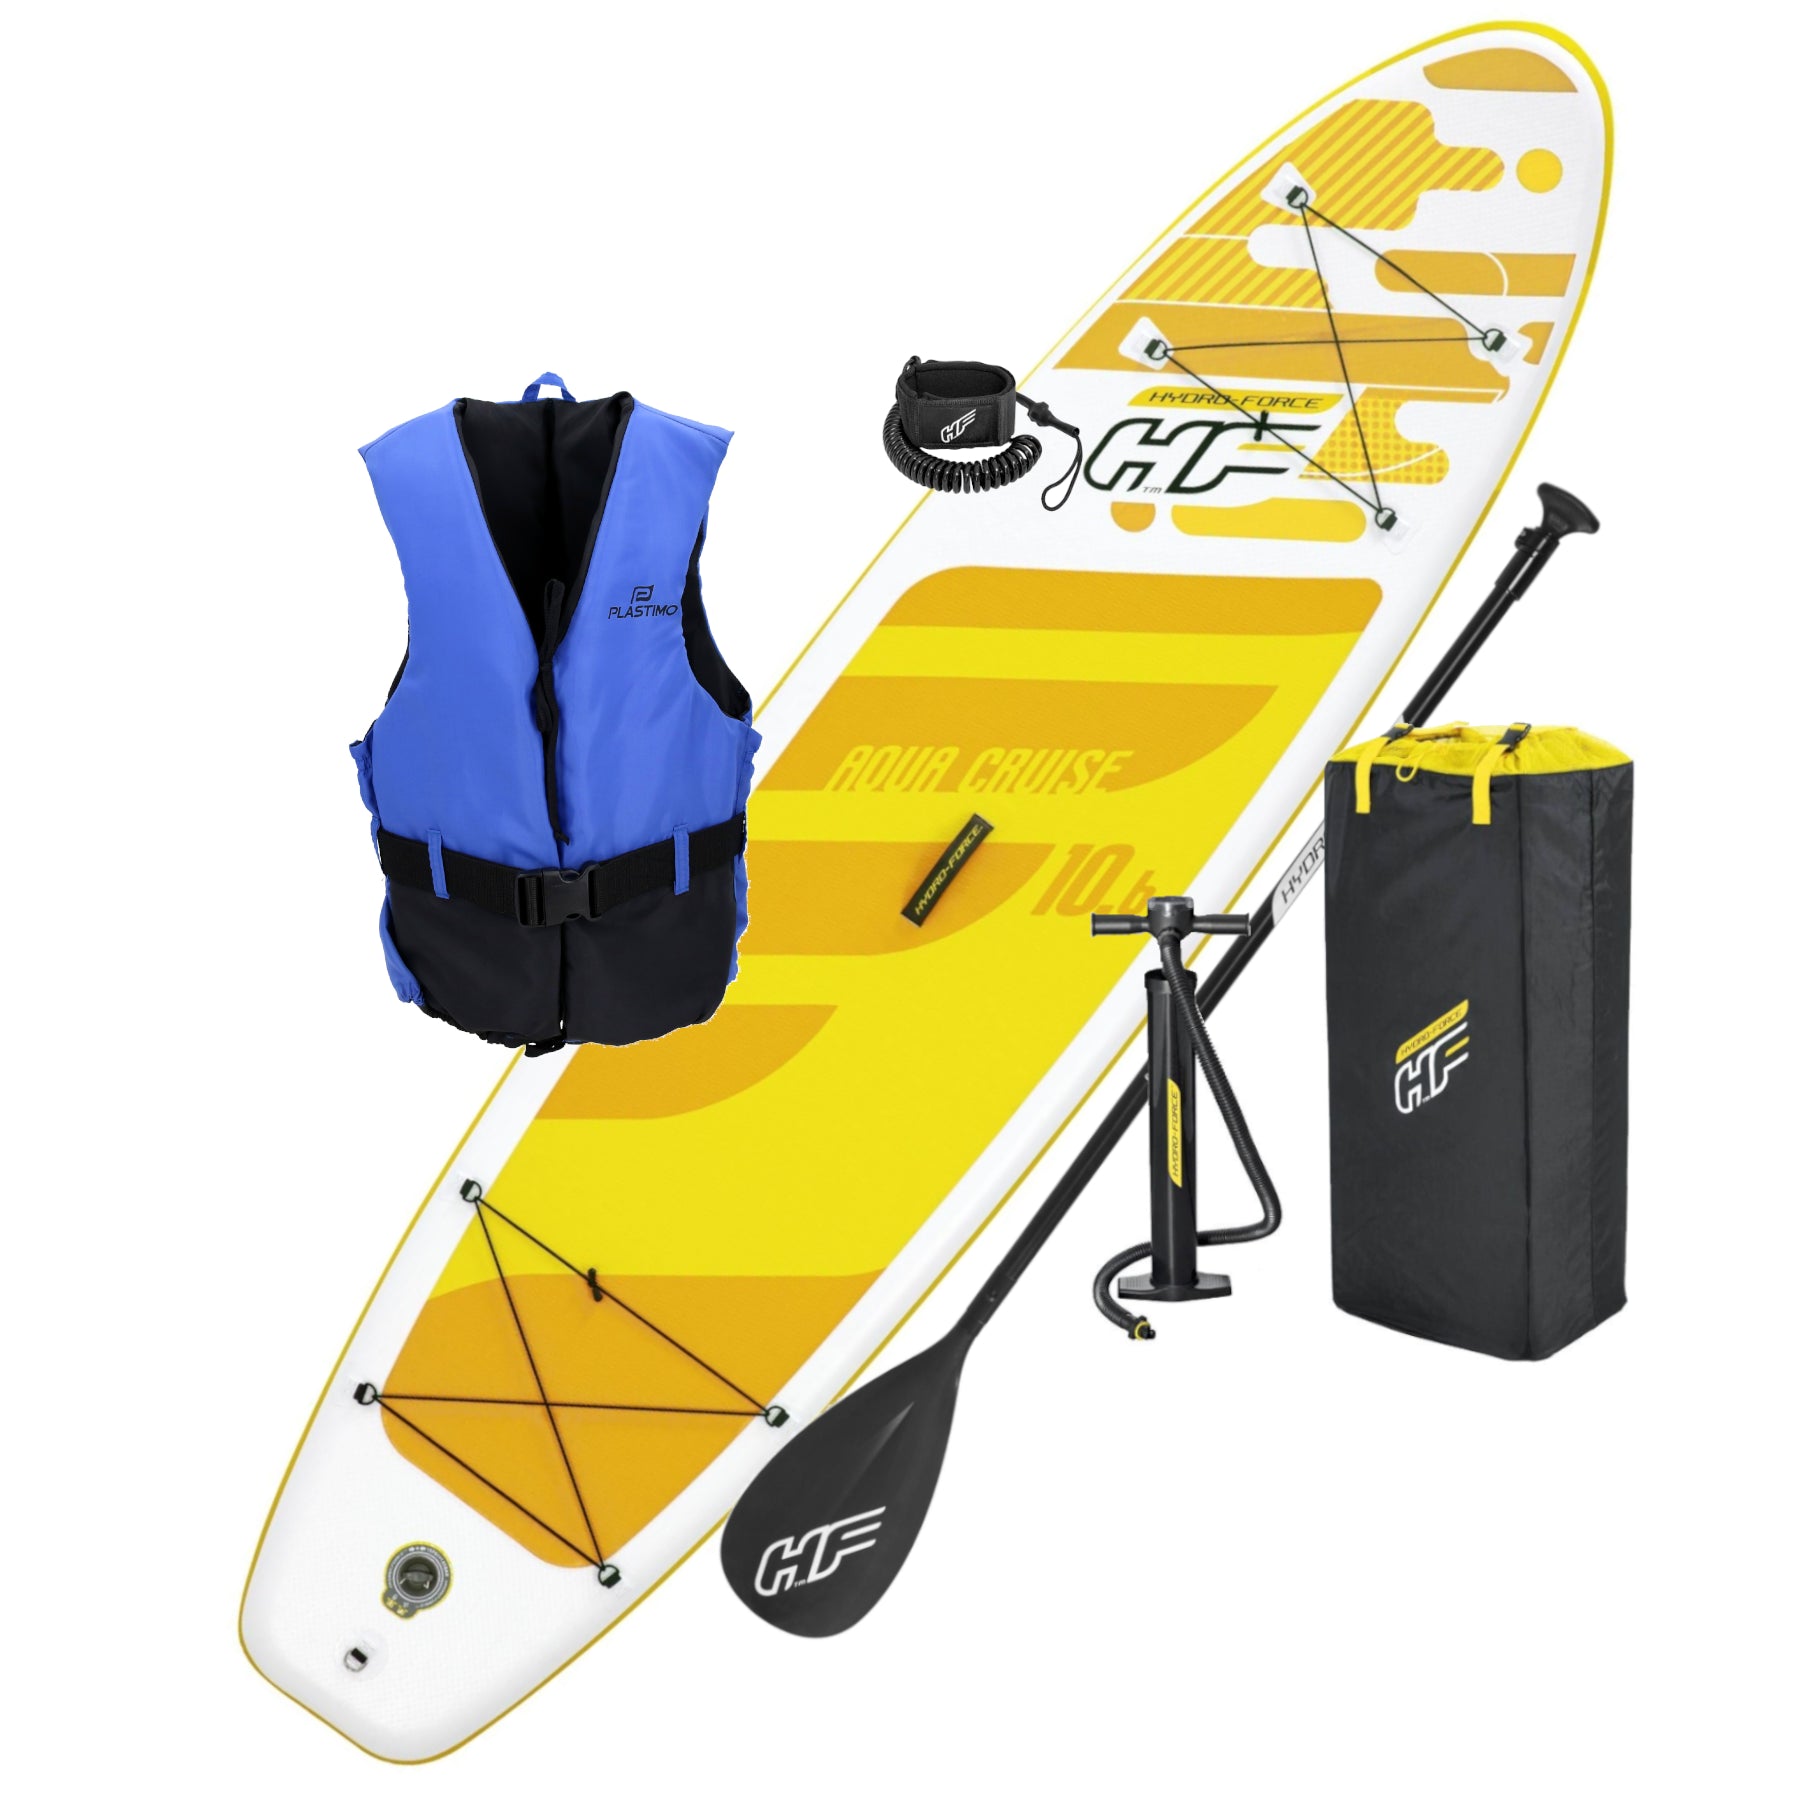 10ft 6" Stand Up Paddle Board 4.75" Hydro Force Aqua Cruise Tech SUP Set